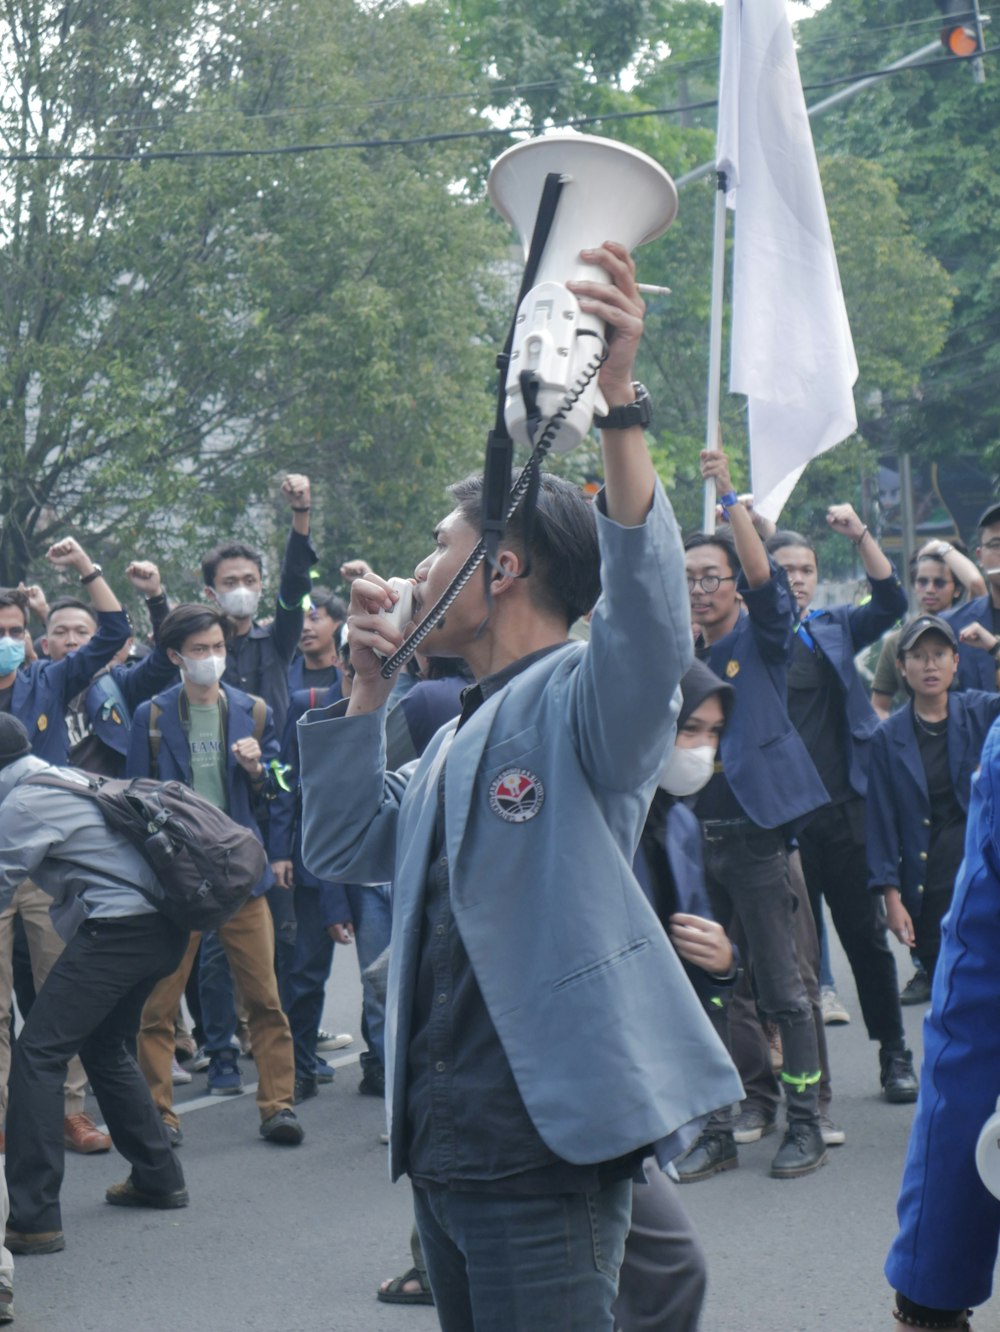 a person holding a megaphone in front of a crowd of people